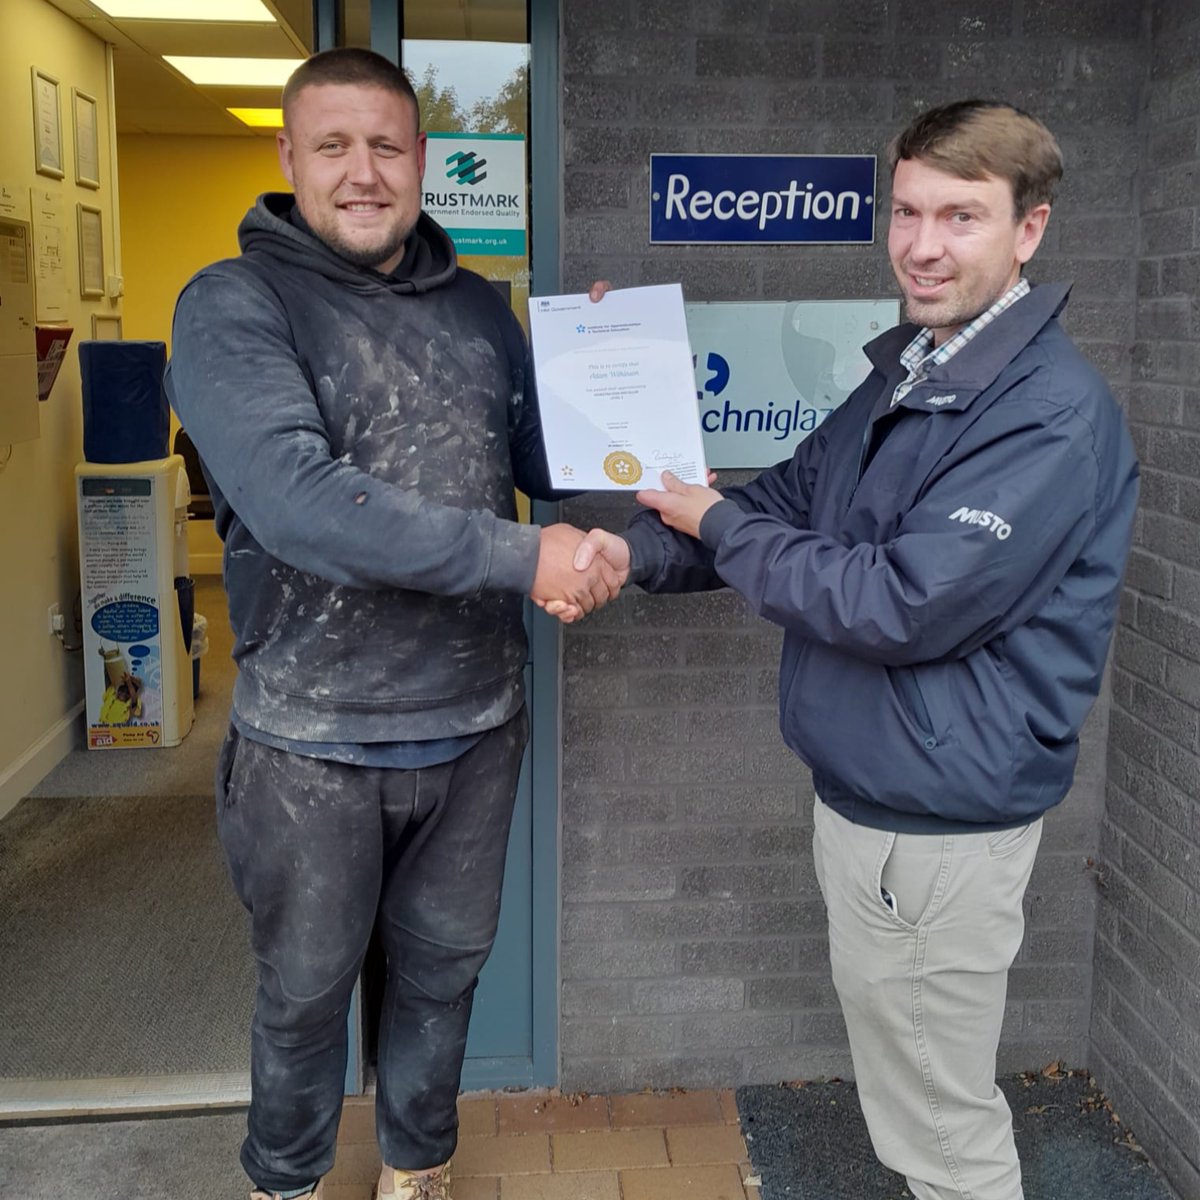 Congratulations to Adam Wilkinson at @techniglaze on achieving his NVQ Diploma in Fenestration Installation and also the Fenestration Installation Apprenticeship Standard, both at Level 2 Well done on all your hard work, Adam! 😁 #Success #Apprenticeships #Fenestration